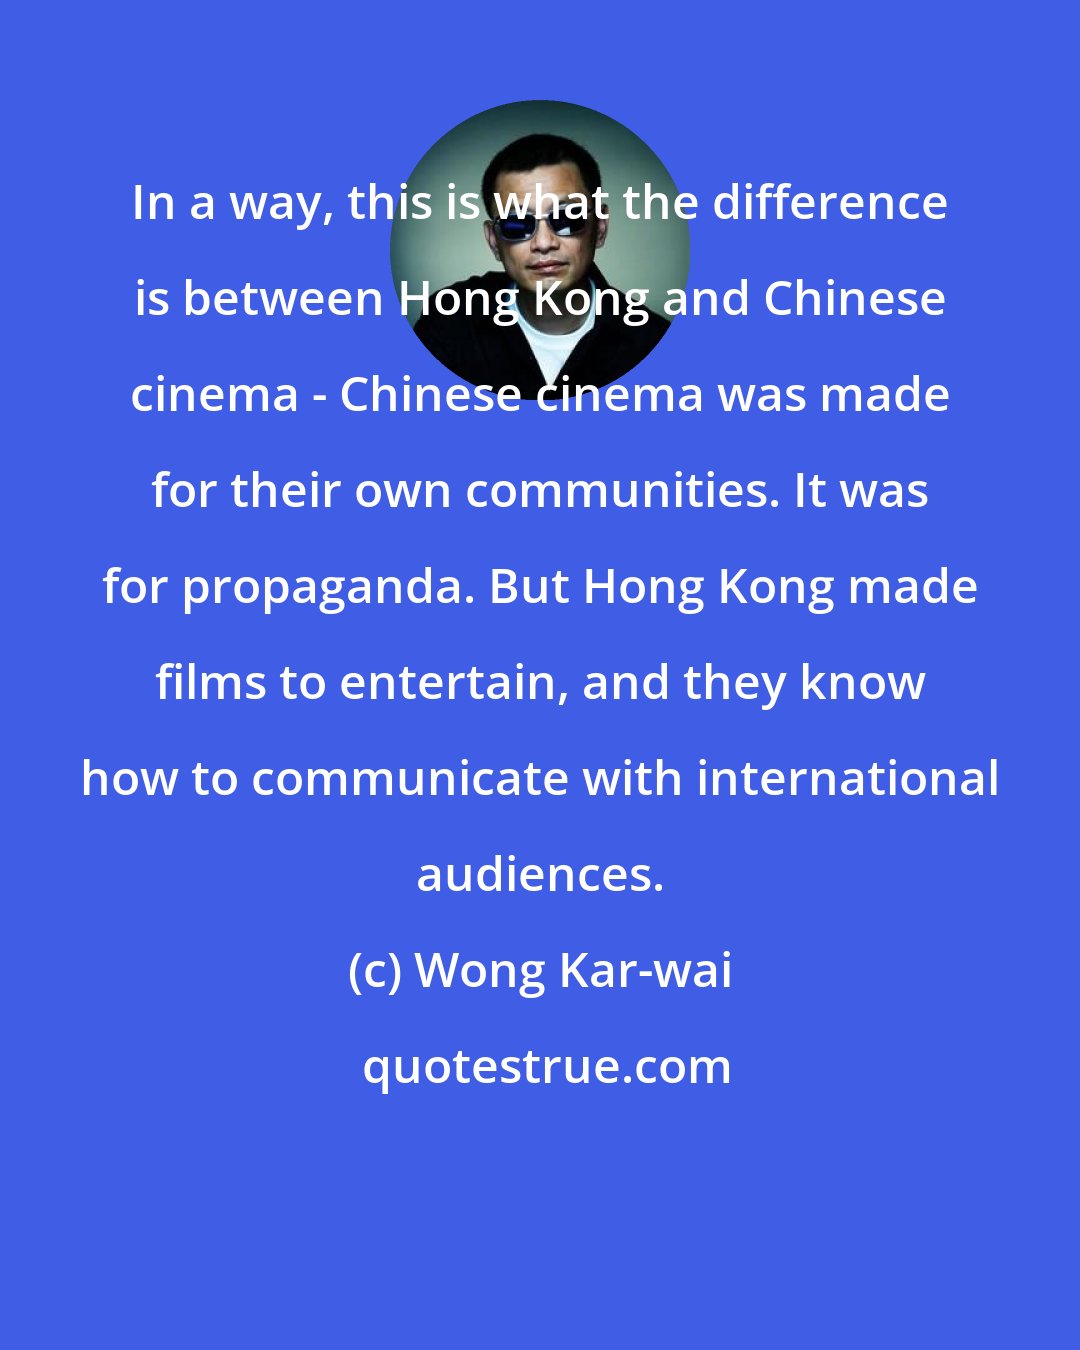 Wong Kar-wai: In a way, this is what the difference is between Hong Kong and Chinese cinema - Chinese cinema was made for their own communities. It was for propaganda. But Hong Kong made films to entertain, and they know how to communicate with international audiences.